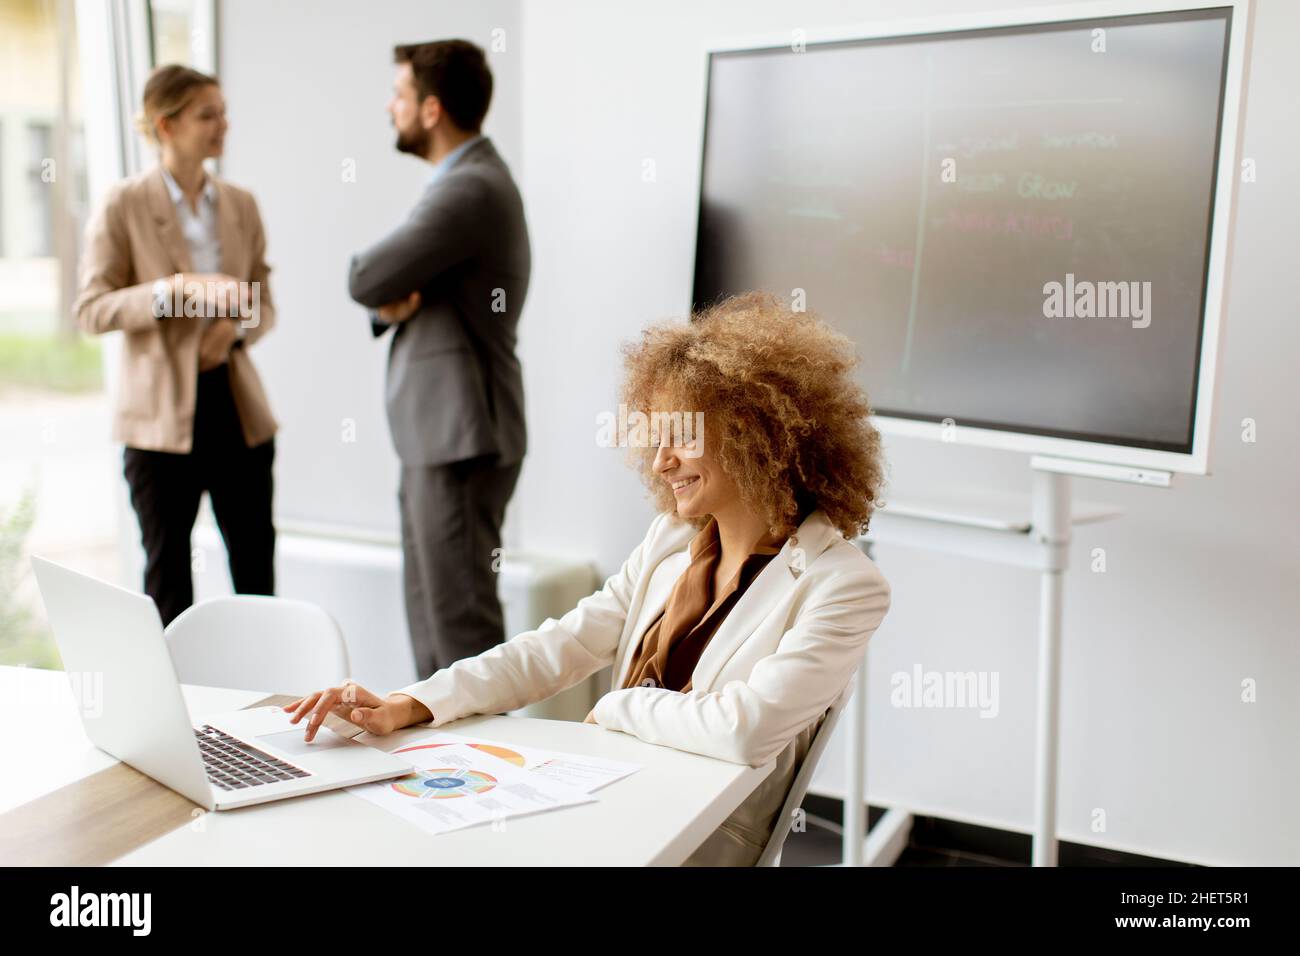 Young curly hair businesswoman using laptop in the office with young people works behind her Stock Photo